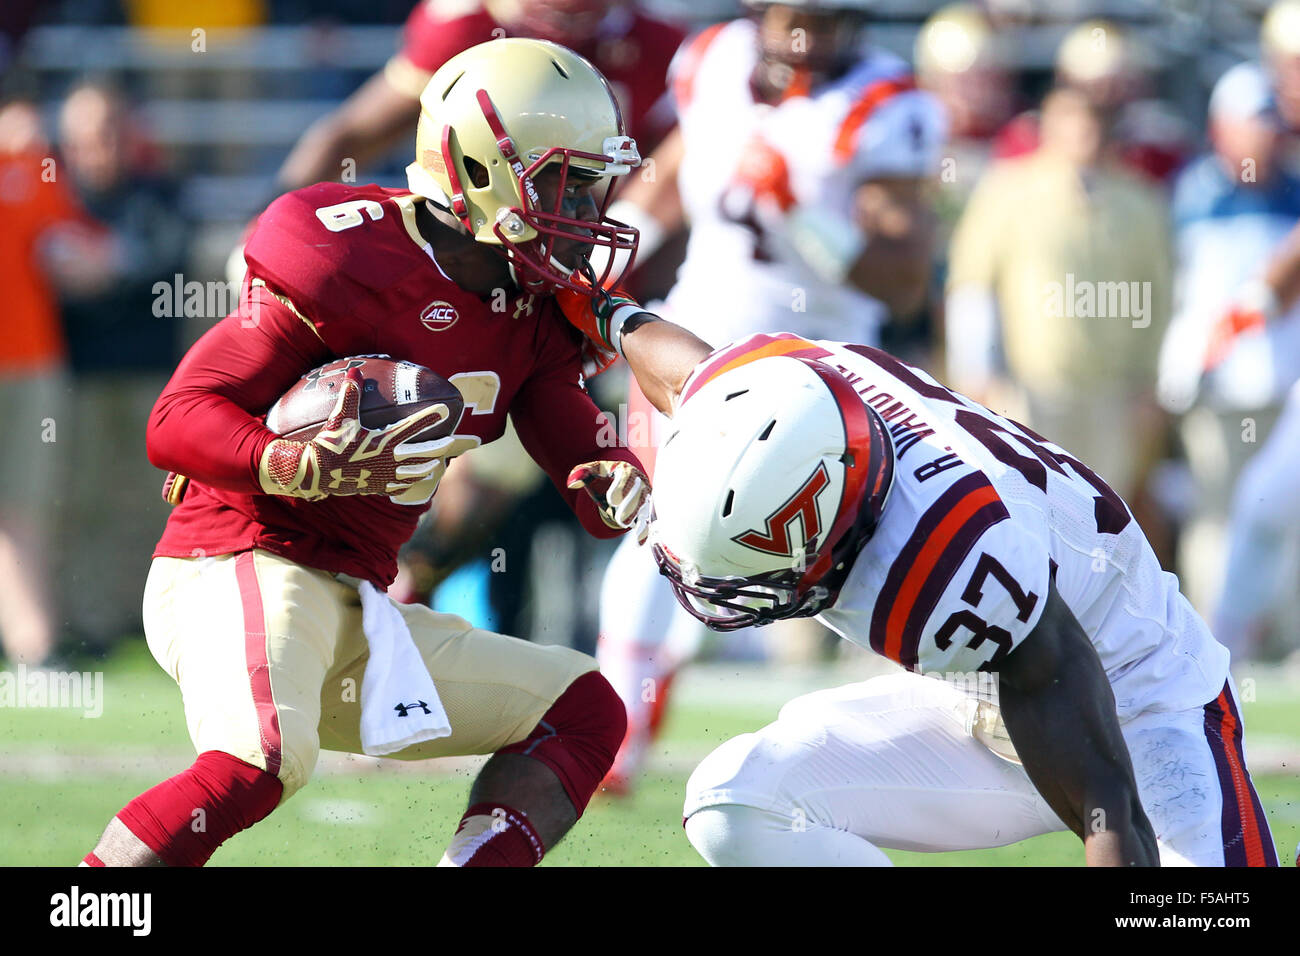 Alumni Stadium. 31st Oct, 2015. MA, USA; Boston College Eagles wide receiver Sherman Alston (6) avoids a tackles by Virginia Tech Hokies linebacker Ronny Vandyke (37) during the first half of the NCAA football game between the Boston College Eagles and Virginia Tech Hokies at Alumni Stadium. Anthony Nesmith/Cal Sport Media/Alamy Live News Stock Photo